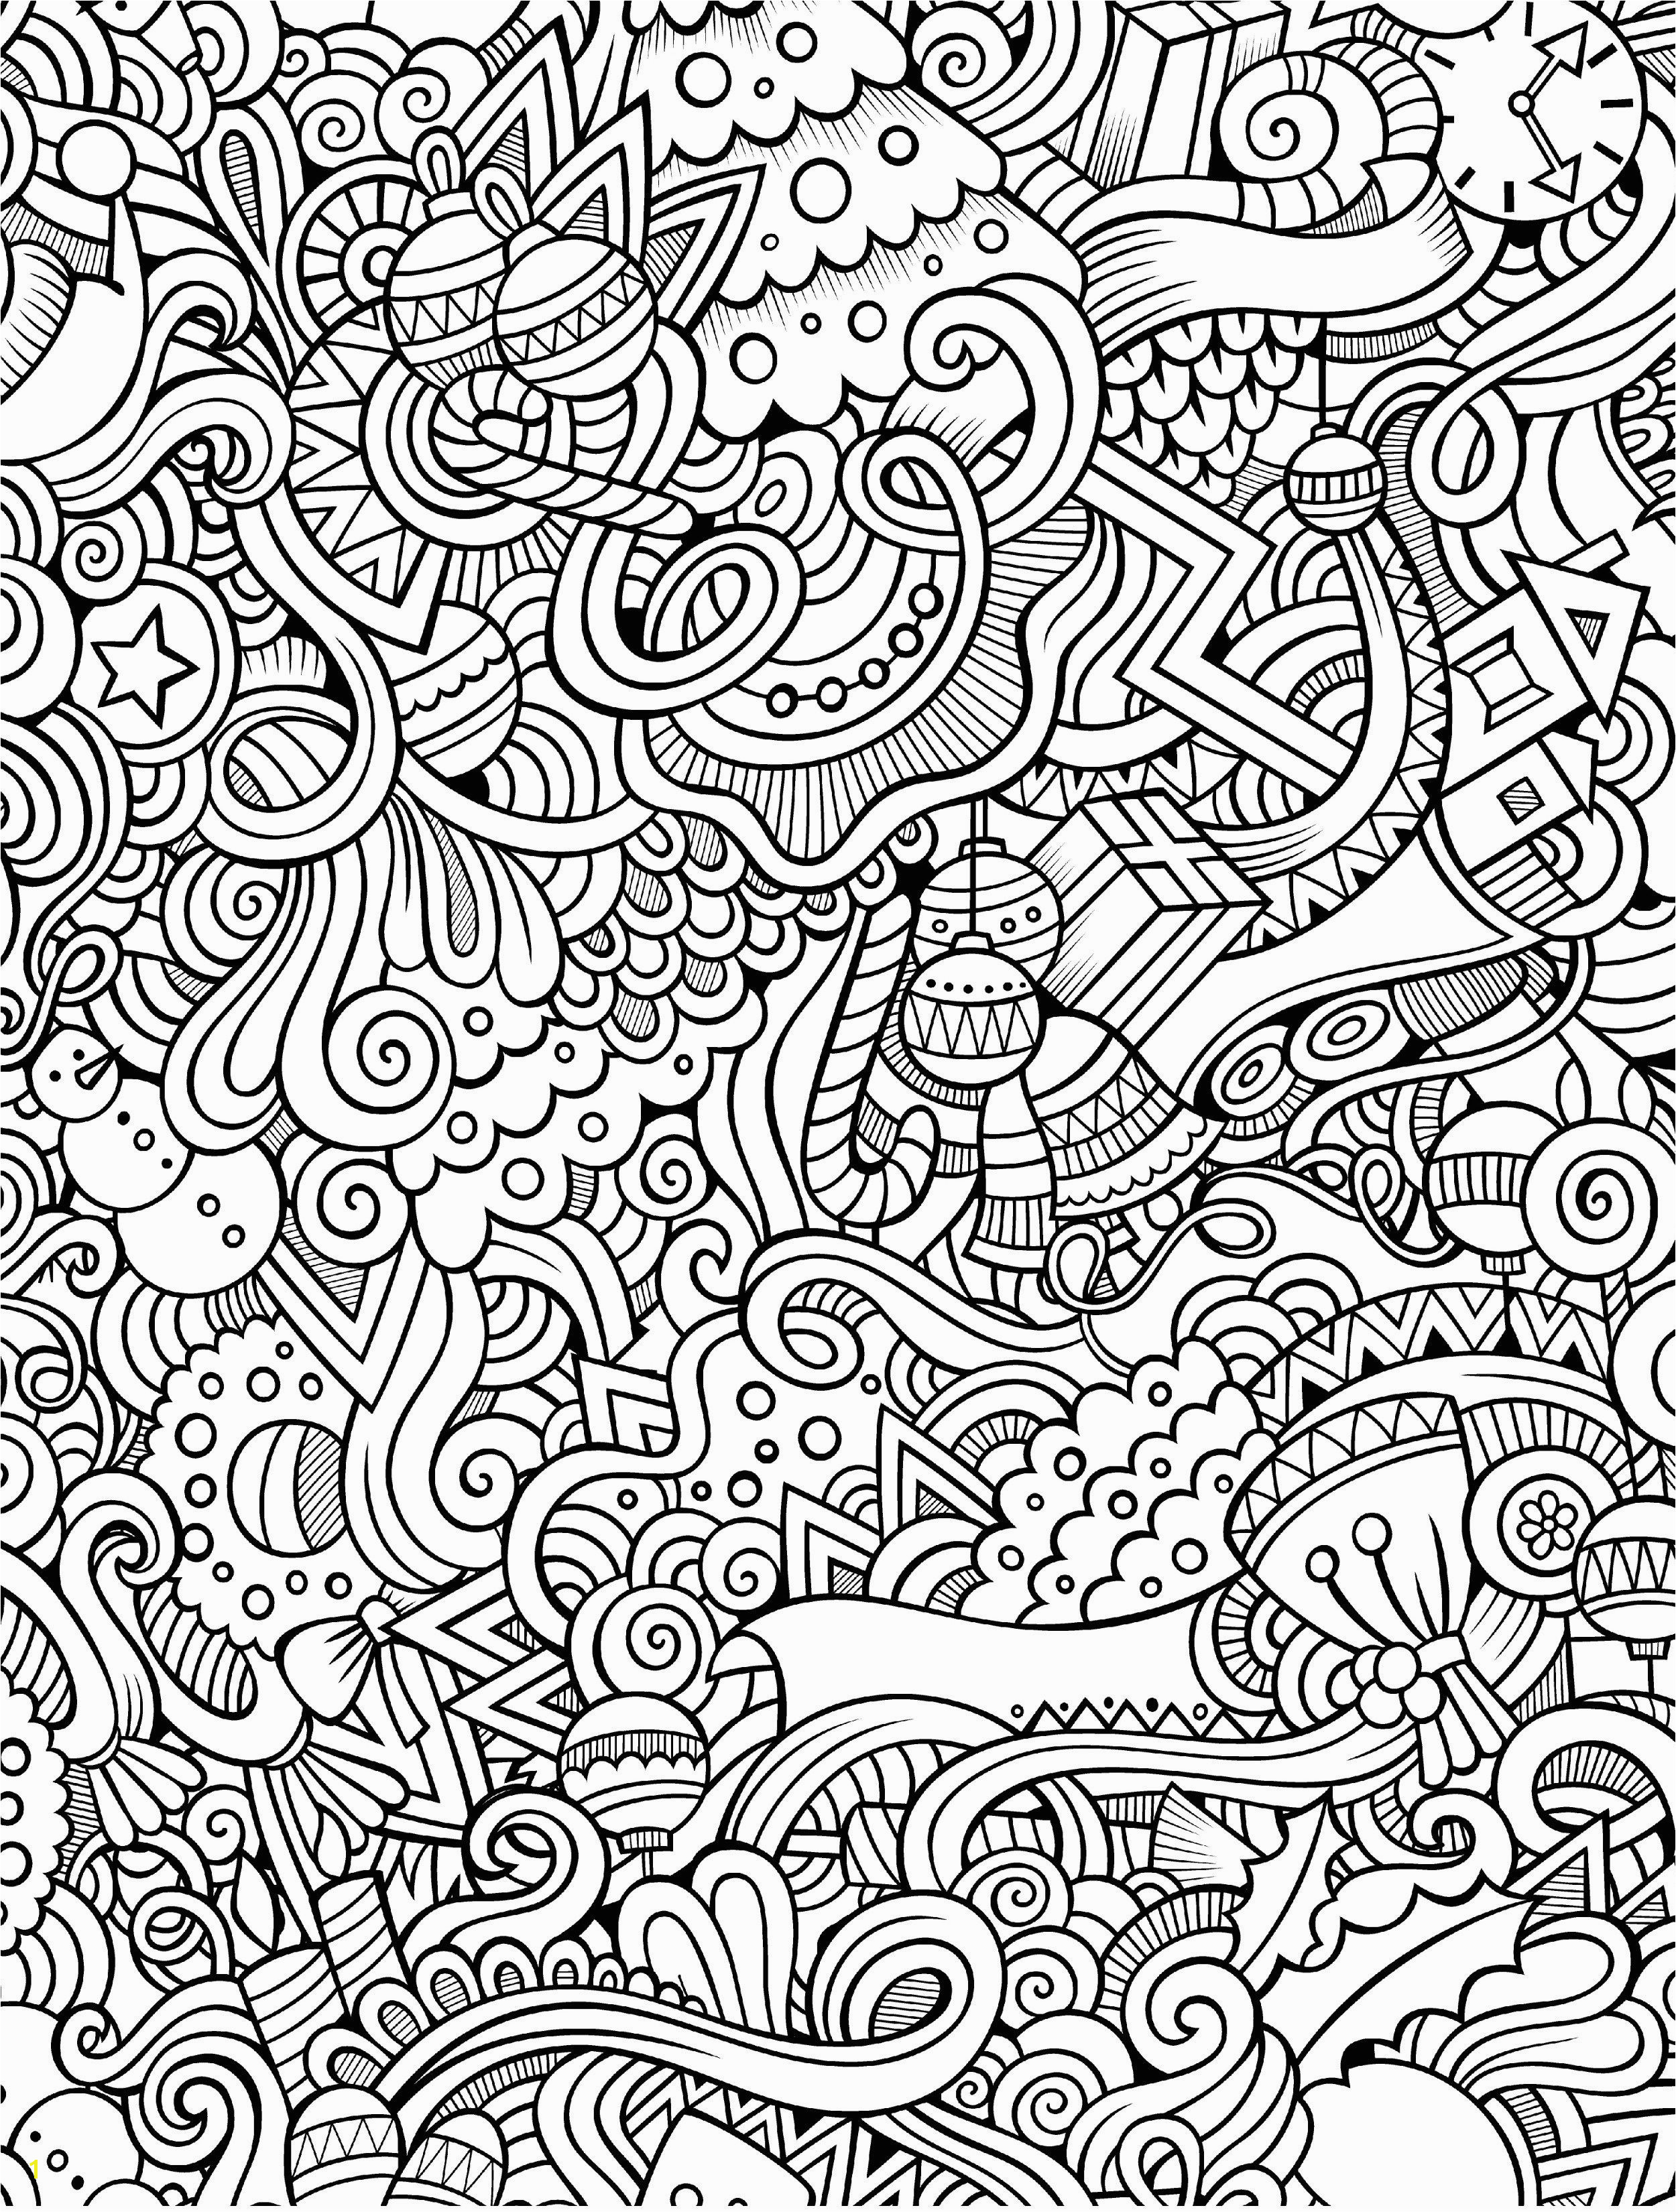 Christmas Coloring Pages for 10 Year Olds 10 Free Printable Holiday Adult Coloring Pages